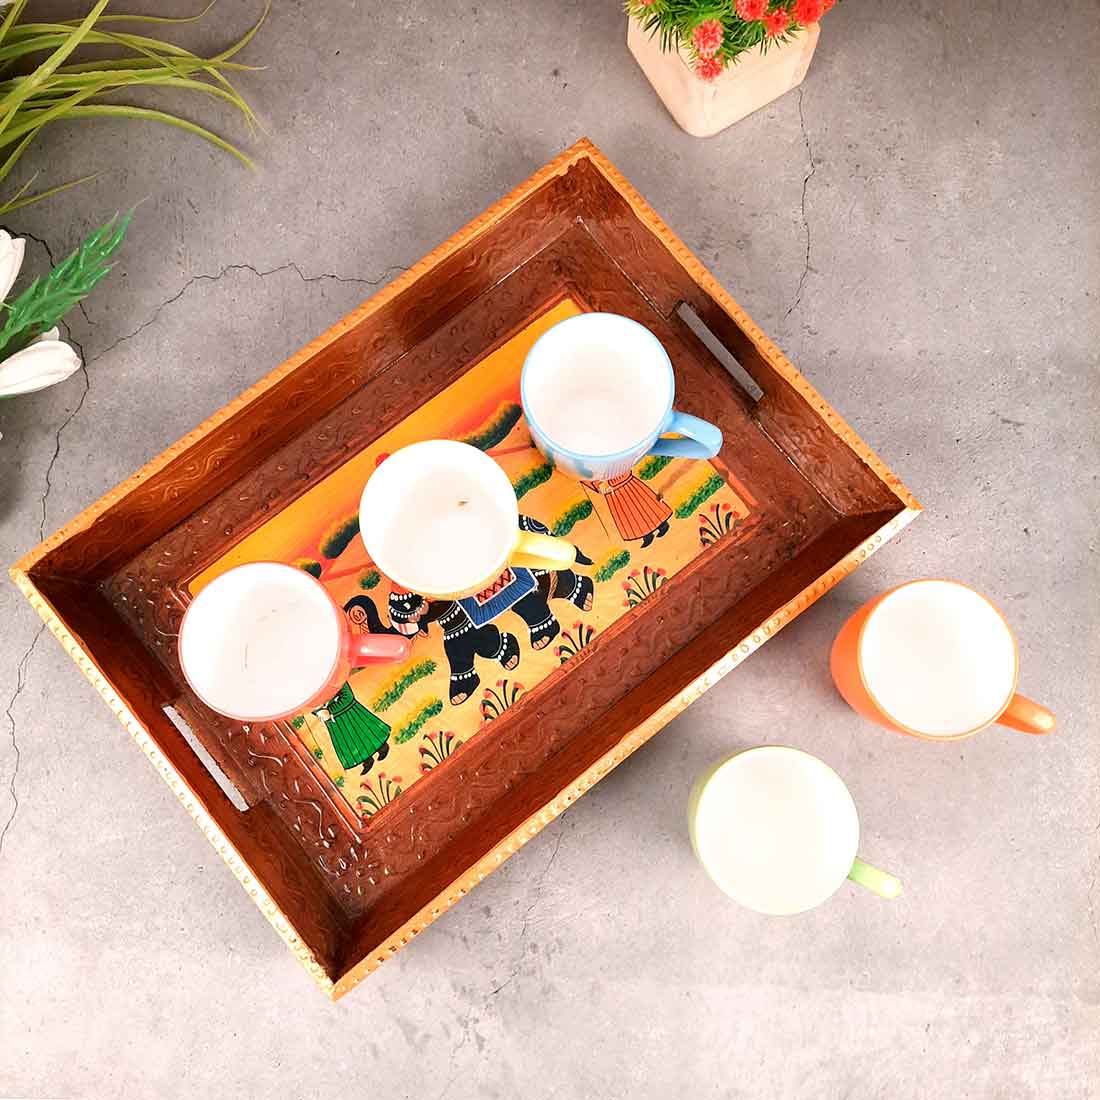 Serving Wooden Tray | Decorative Tray - for Kitchen, Serving & Gifting - 13 Inch - Apkamart#Style_Pack of 1